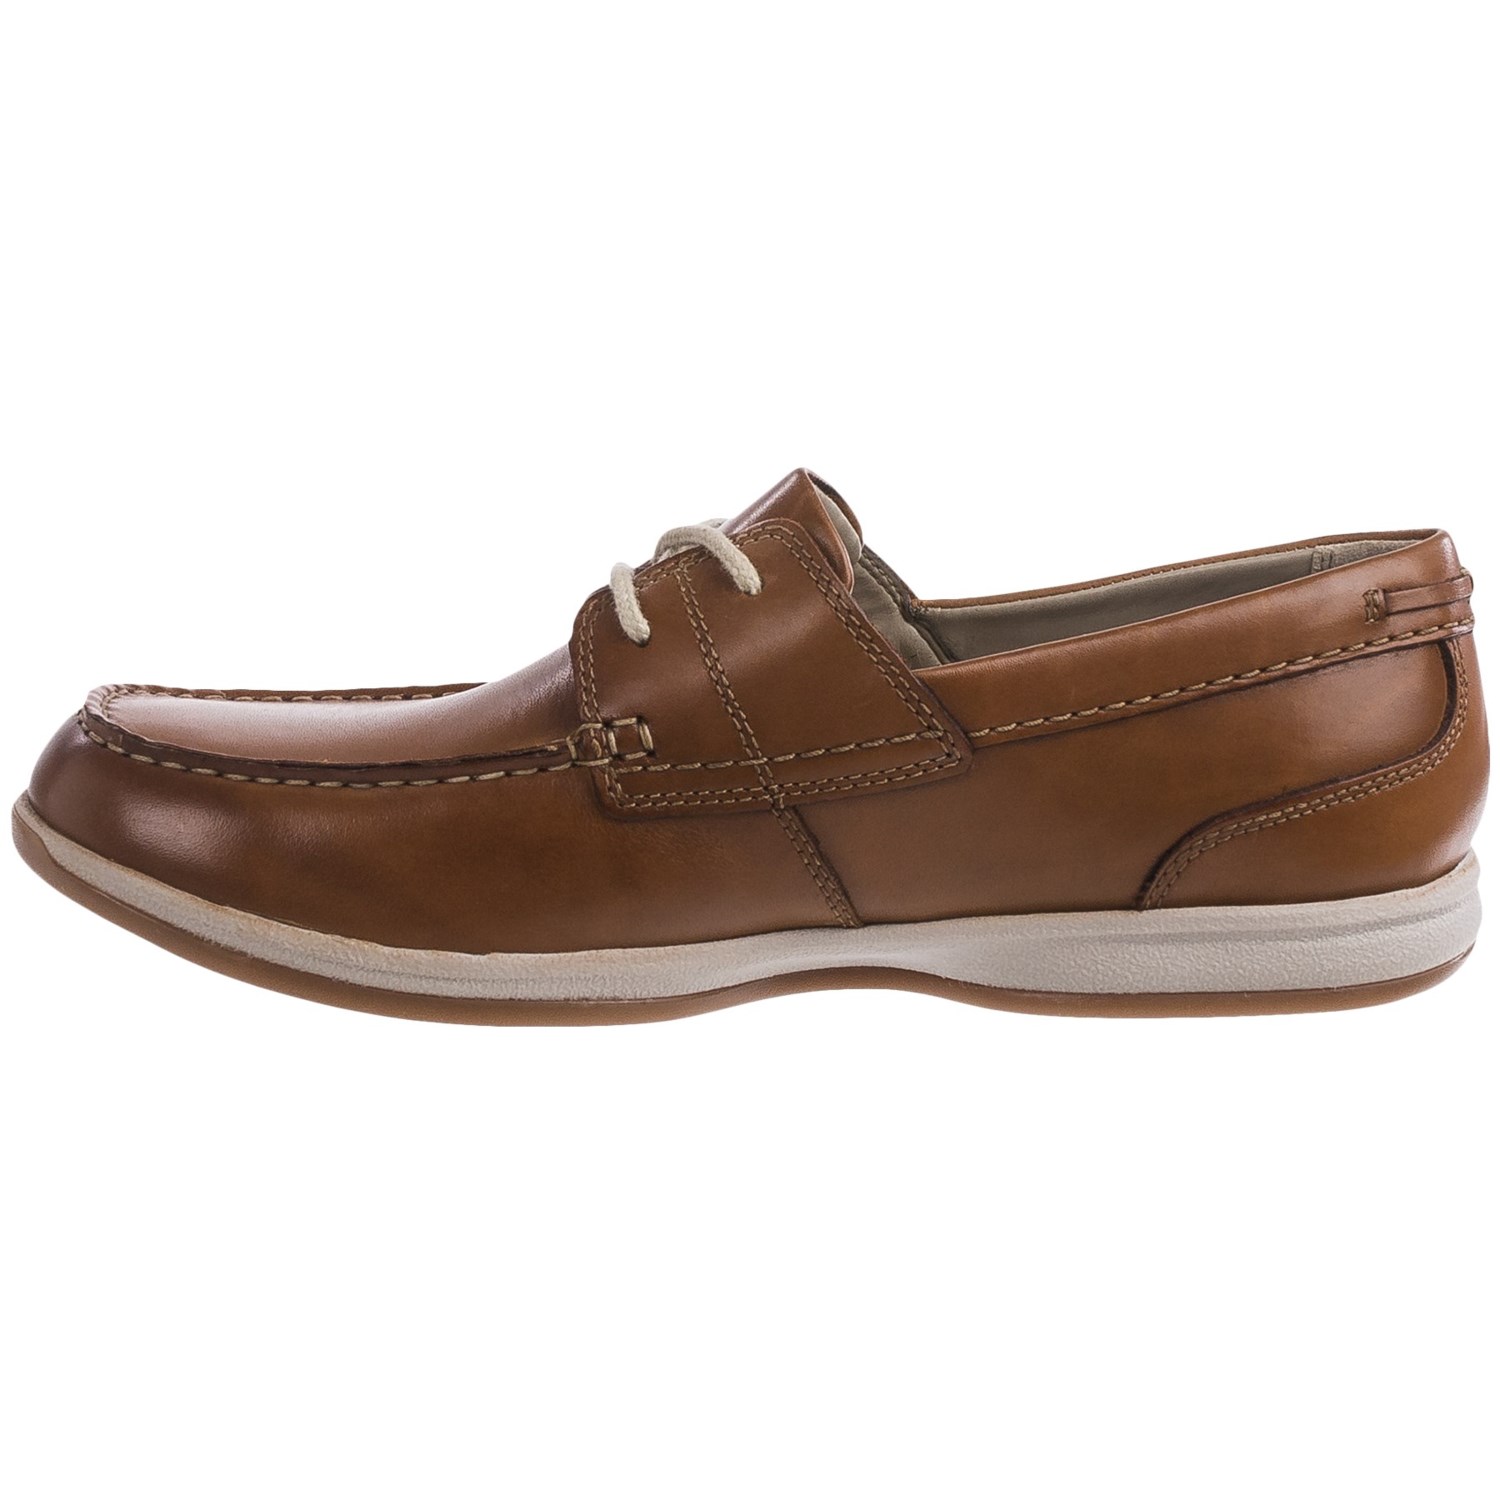 Clarks Fallston Style Boat Shoes (For Men) - Save 44%